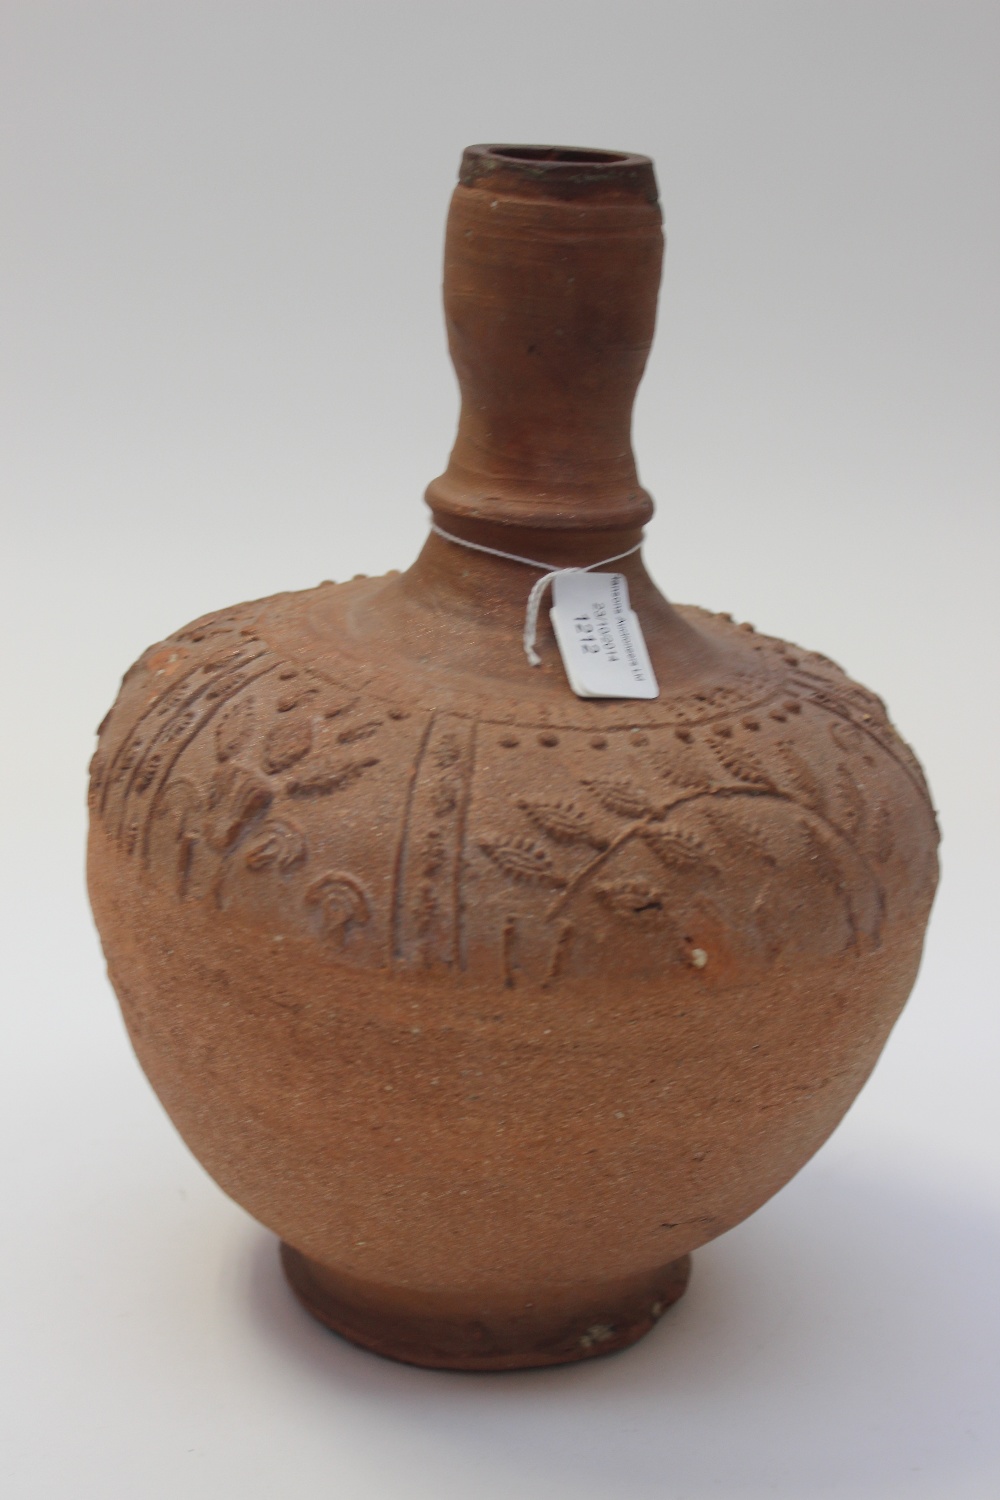 A terracotta vase of necked ovoid form with impressed relief moulded band of floral design, probably